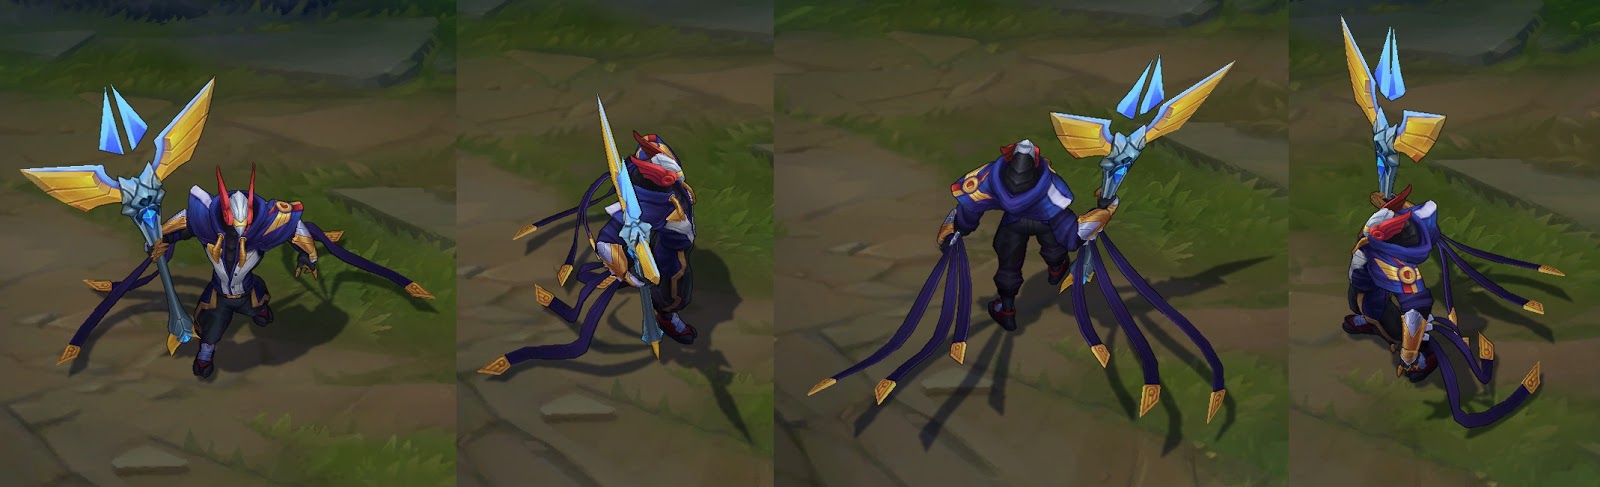 SKT T1 Azir Skin for league of legends ingame picture